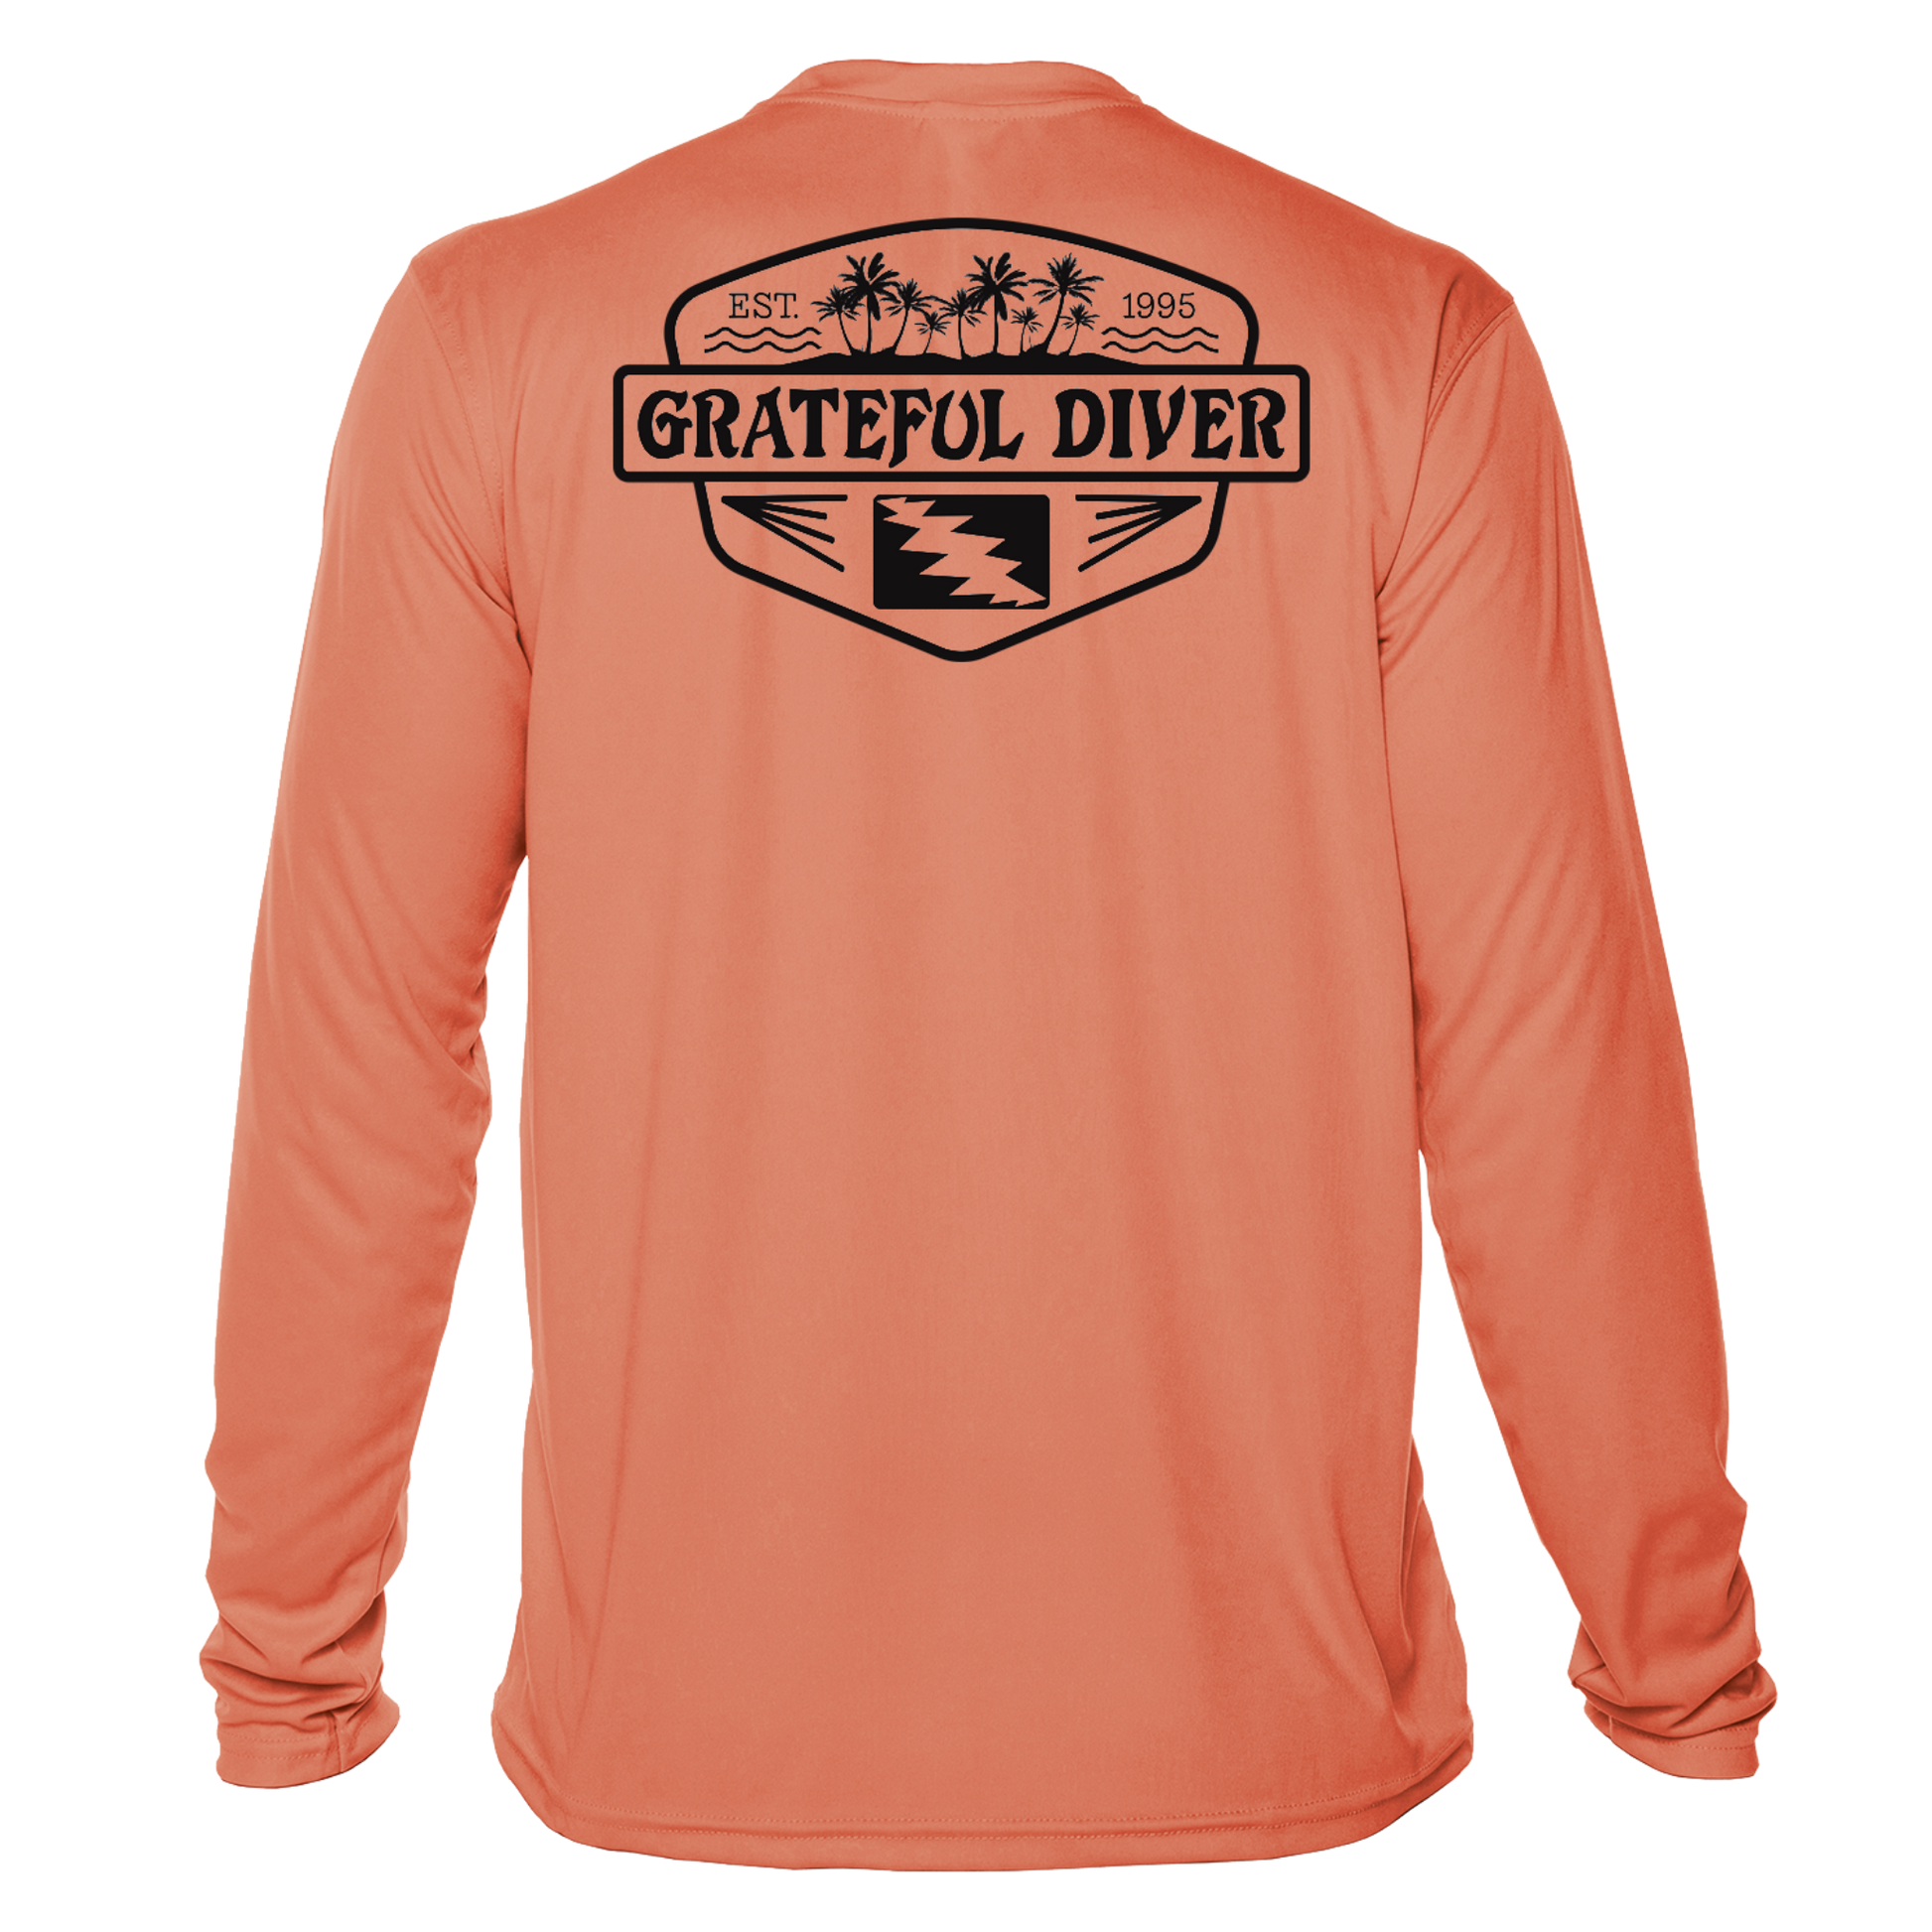 Grateful Diver Palm Tree UV Shirt in salmon showing the back off figure